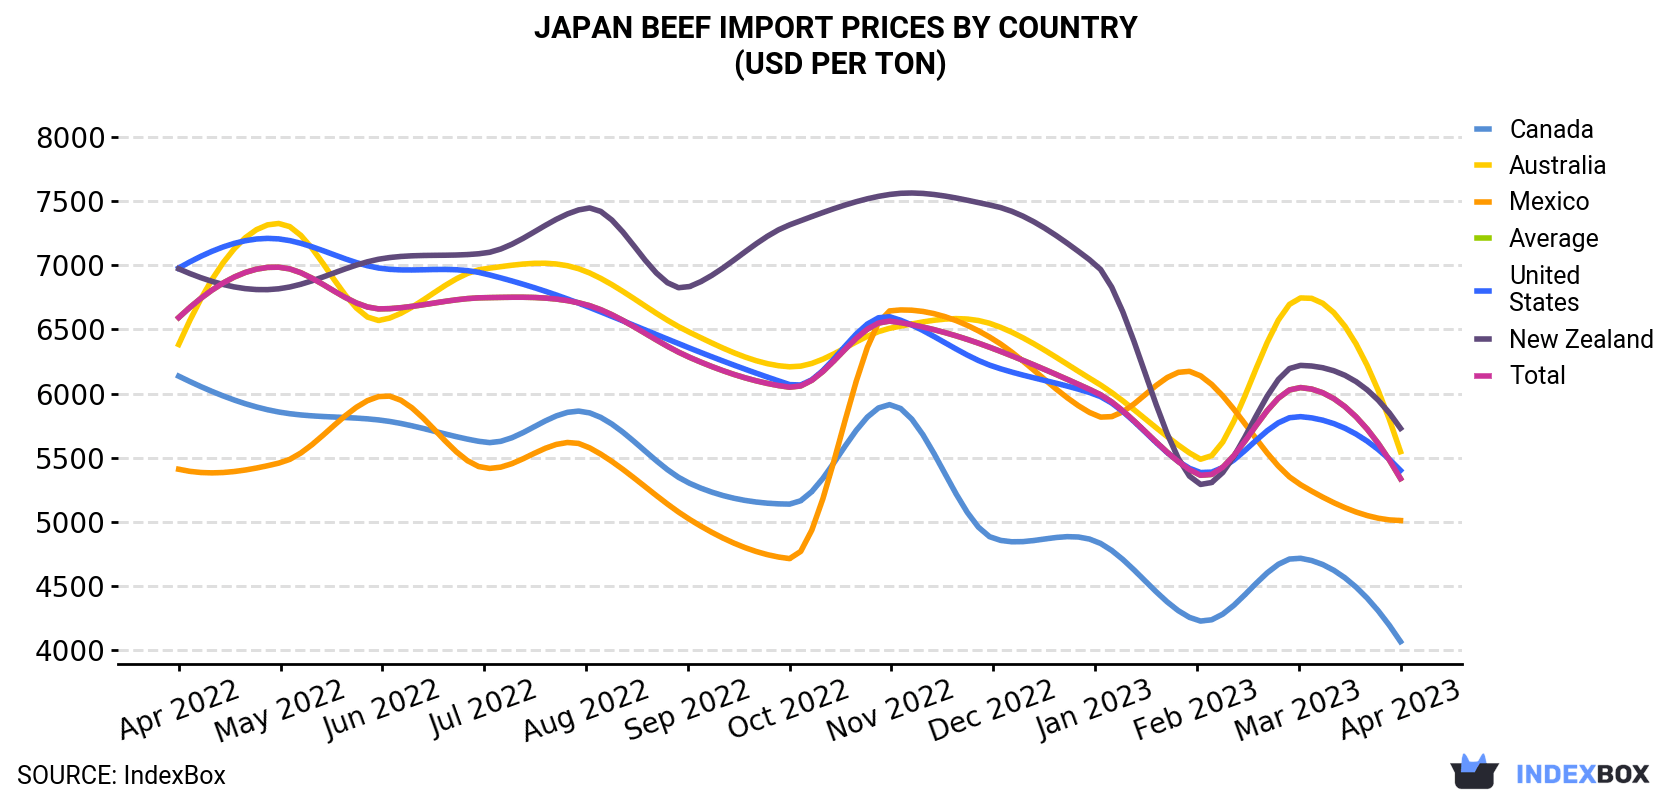 Japan Beef Import Prices By Country (USD Per Ton)